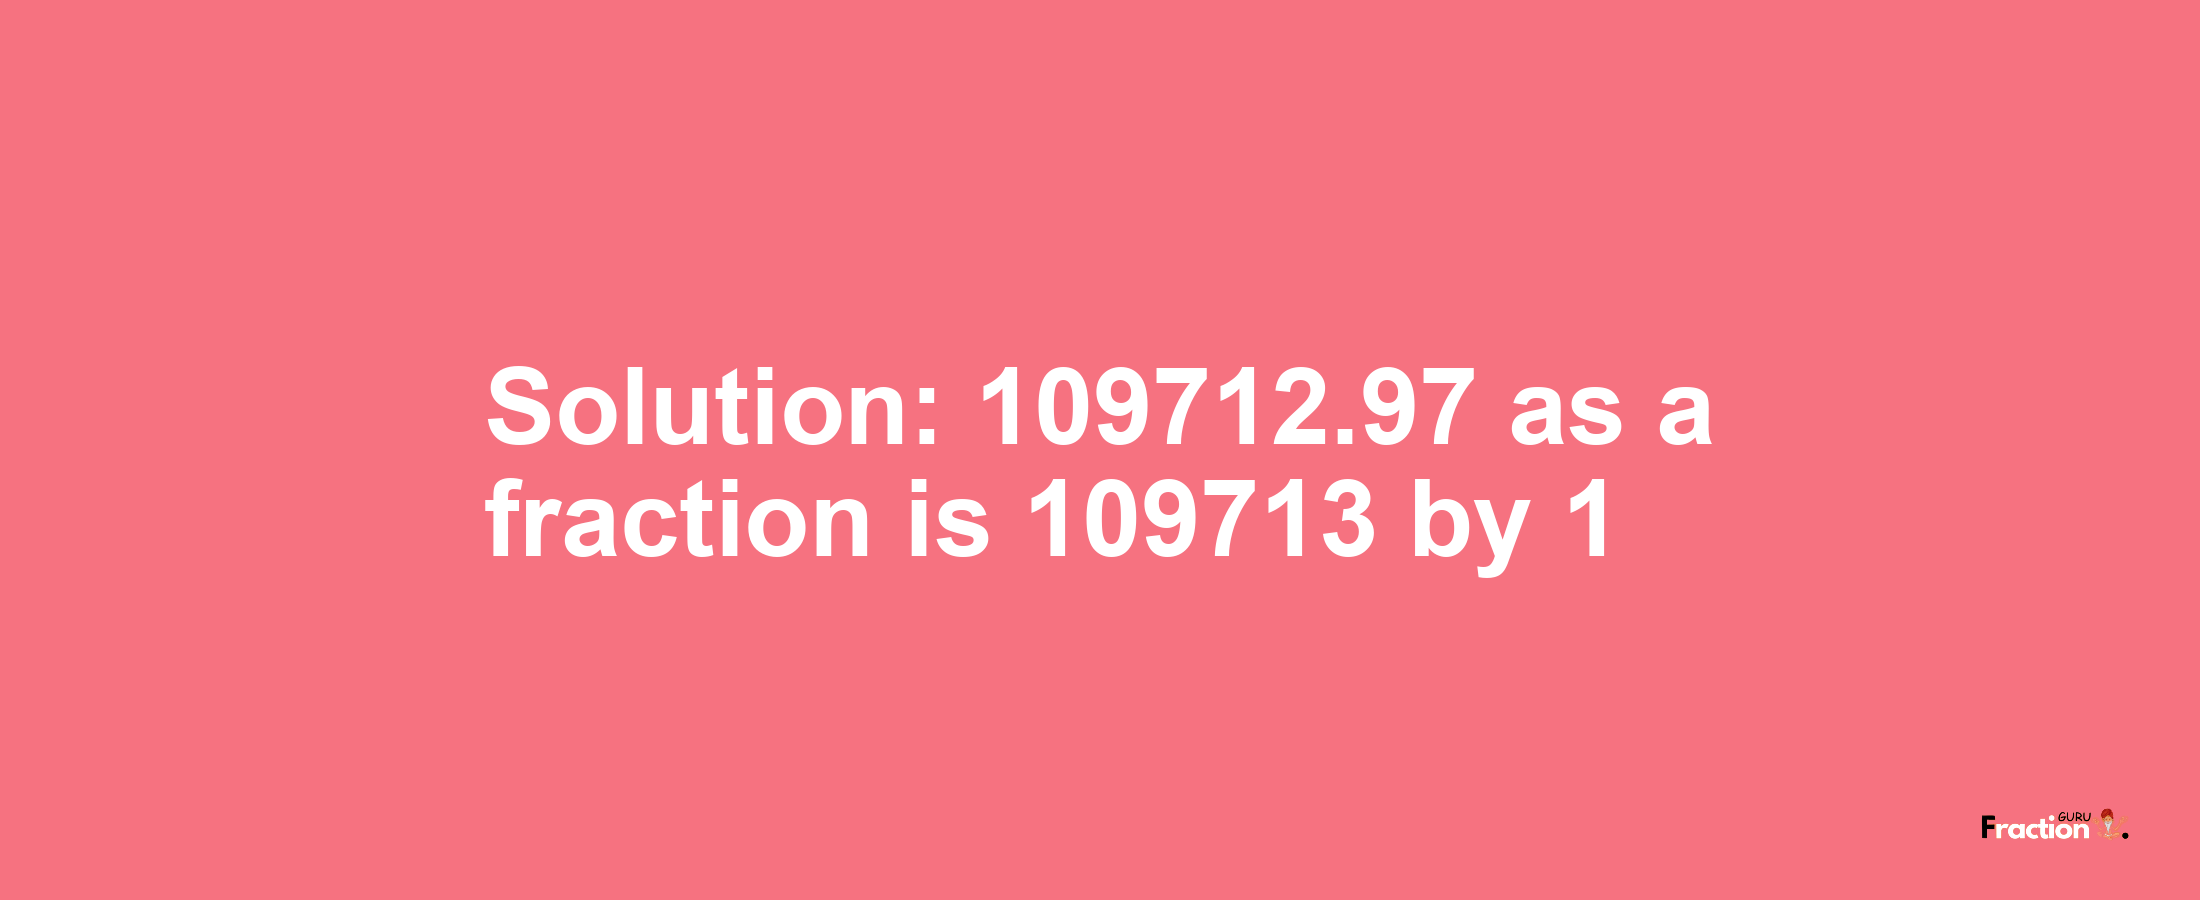 Solution:109712.97 as a fraction is 109713/1